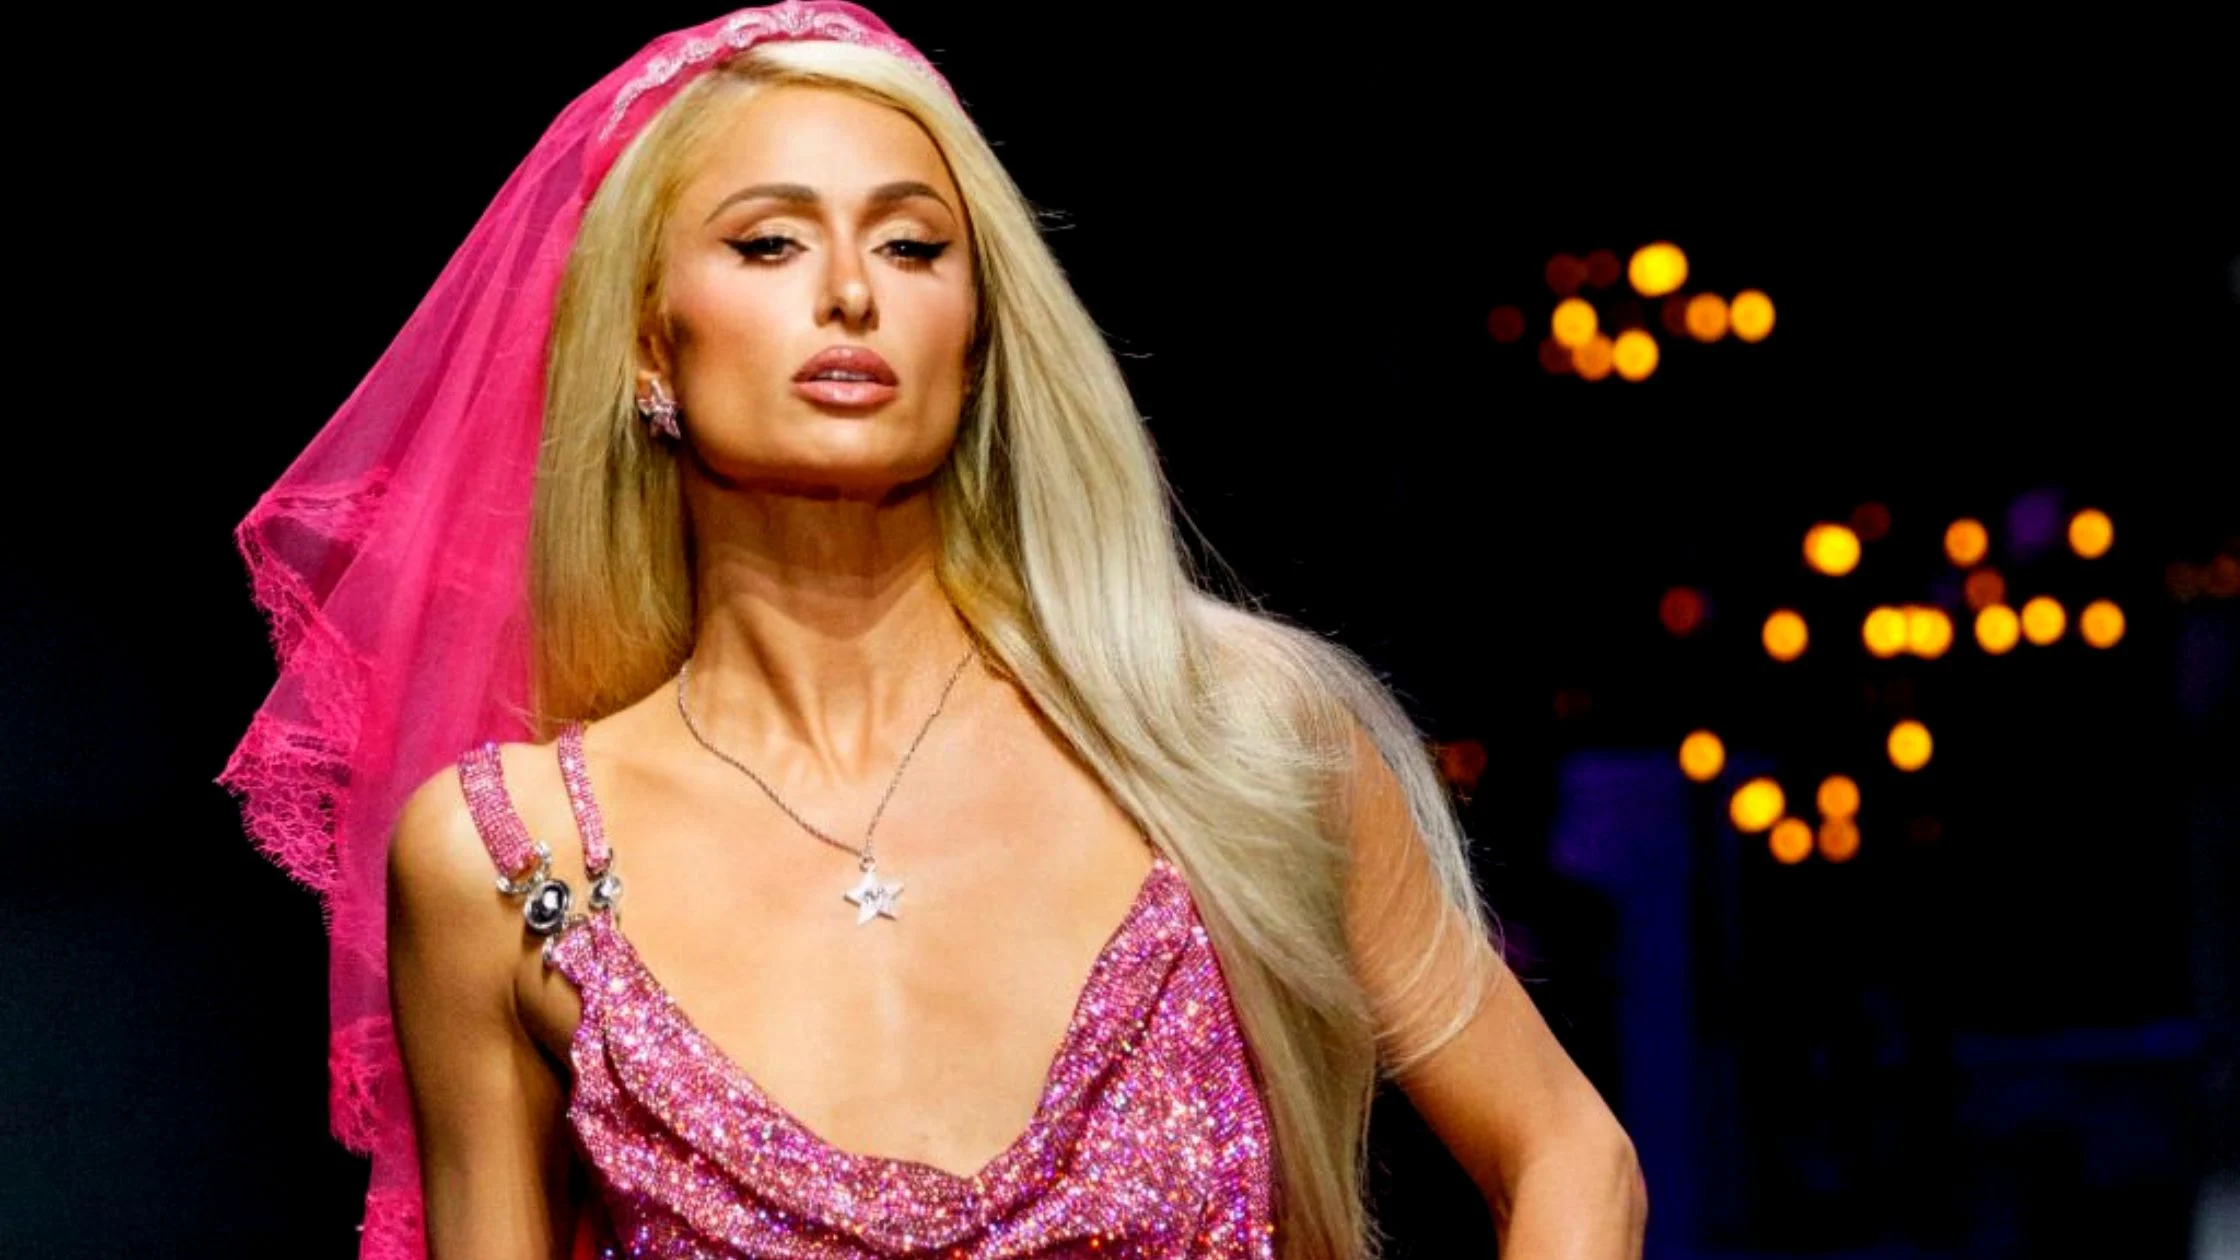 Paris Hilton Revealed The Arrival Of Her First Baby Via Surrogate